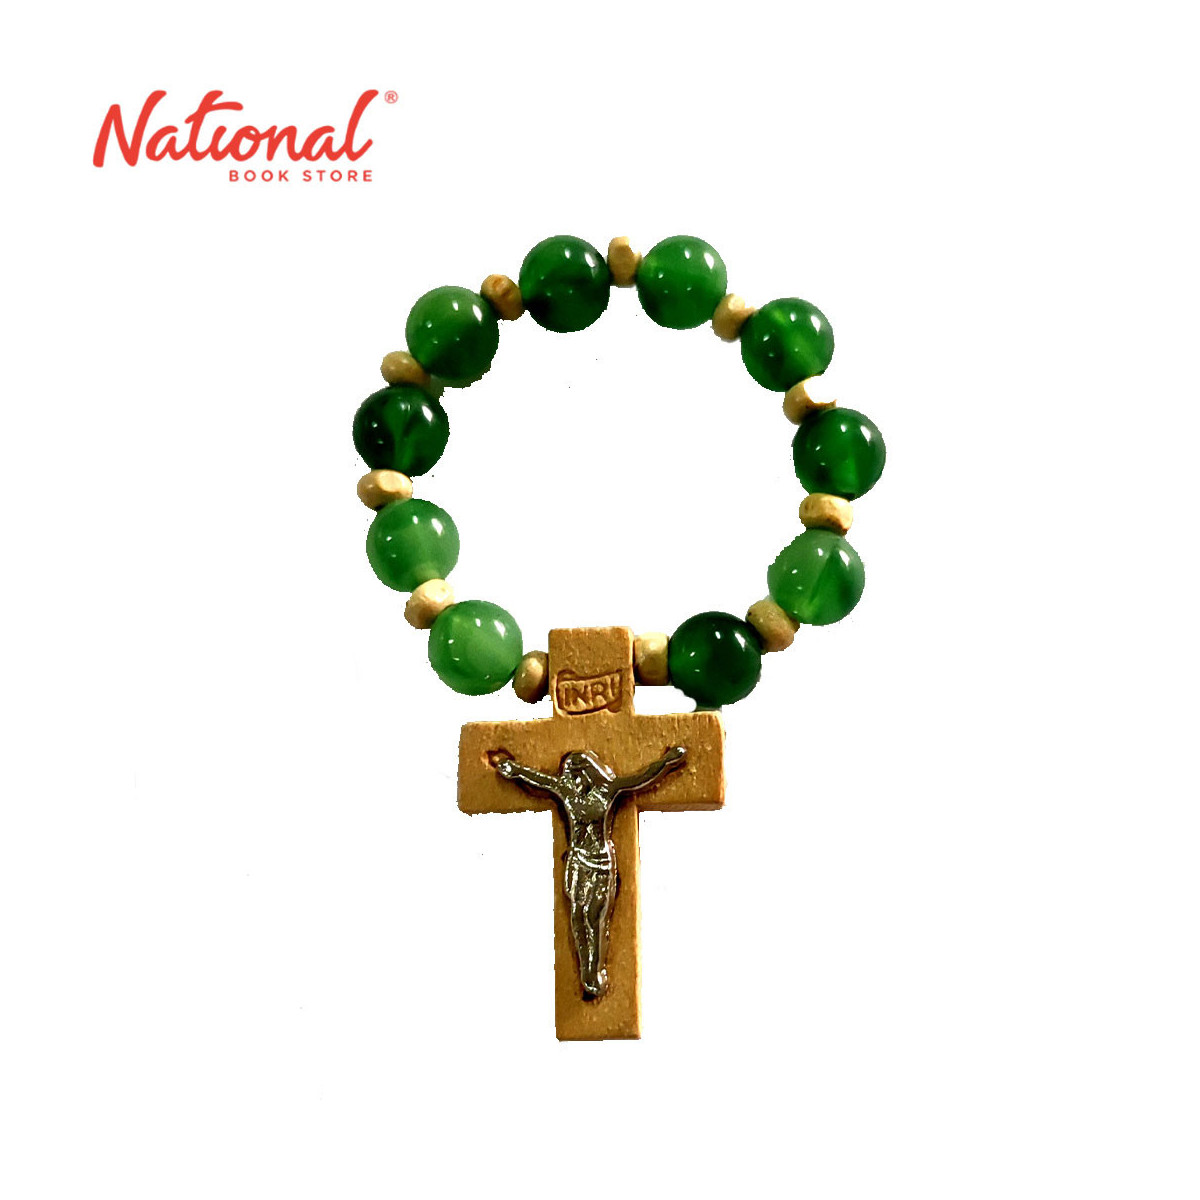 Rosary Green Bead Decade Ring 7C18-0028 - Gift Items